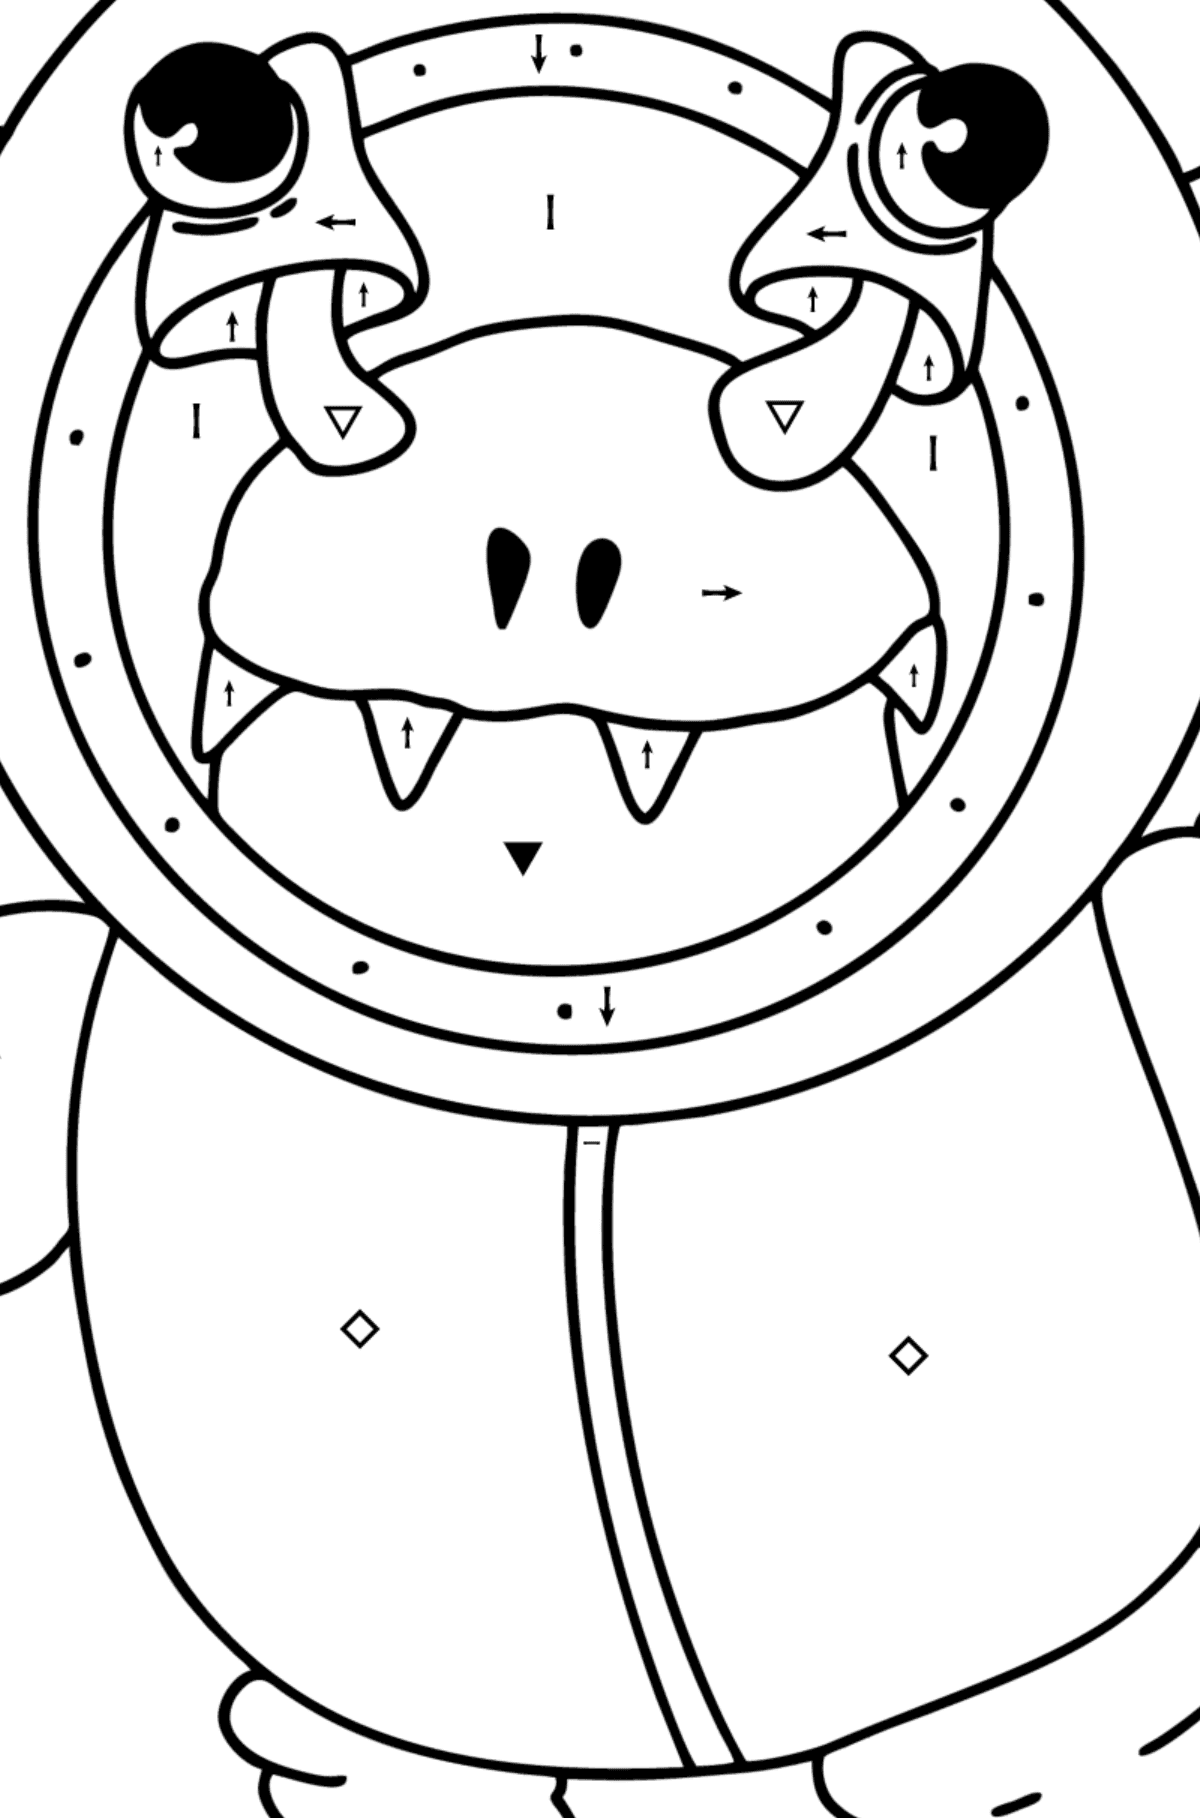 Coloring page alien in spacesuit - Coloring by Symbols for Kids